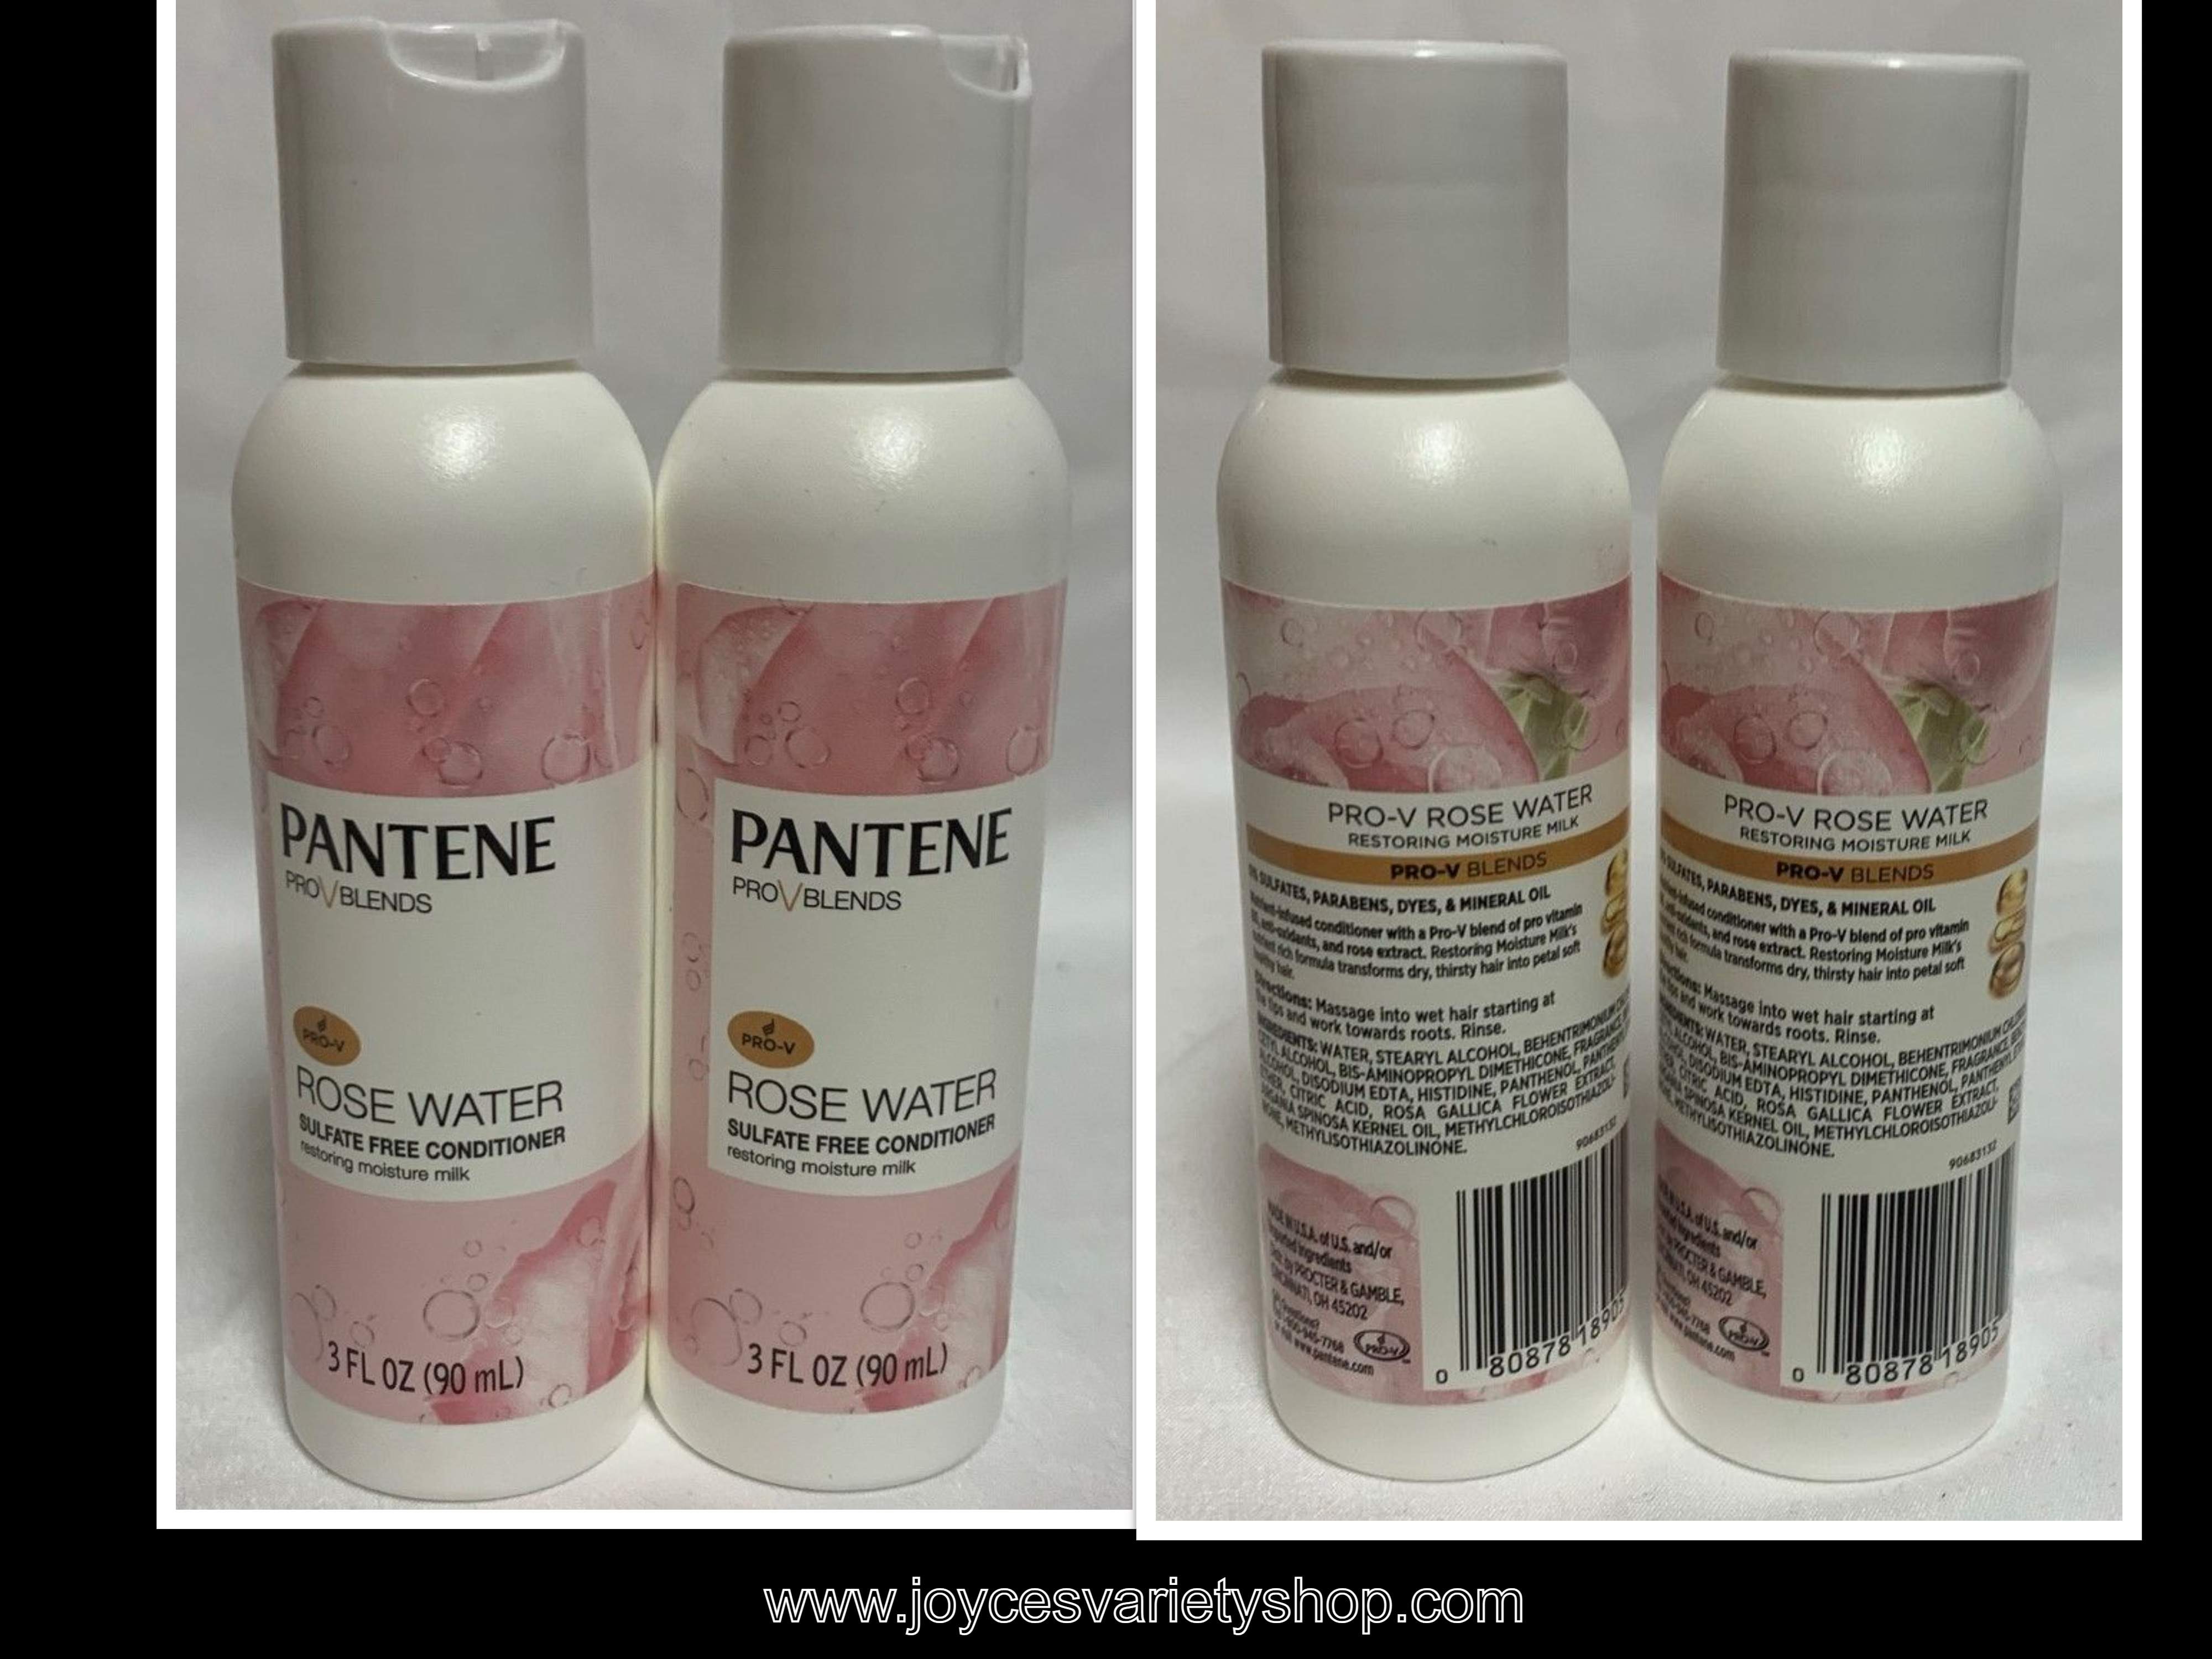 Pantene Pro-V Rose Water Hair Conditioner Sulfate Free 3 FL OZ Pack of 2